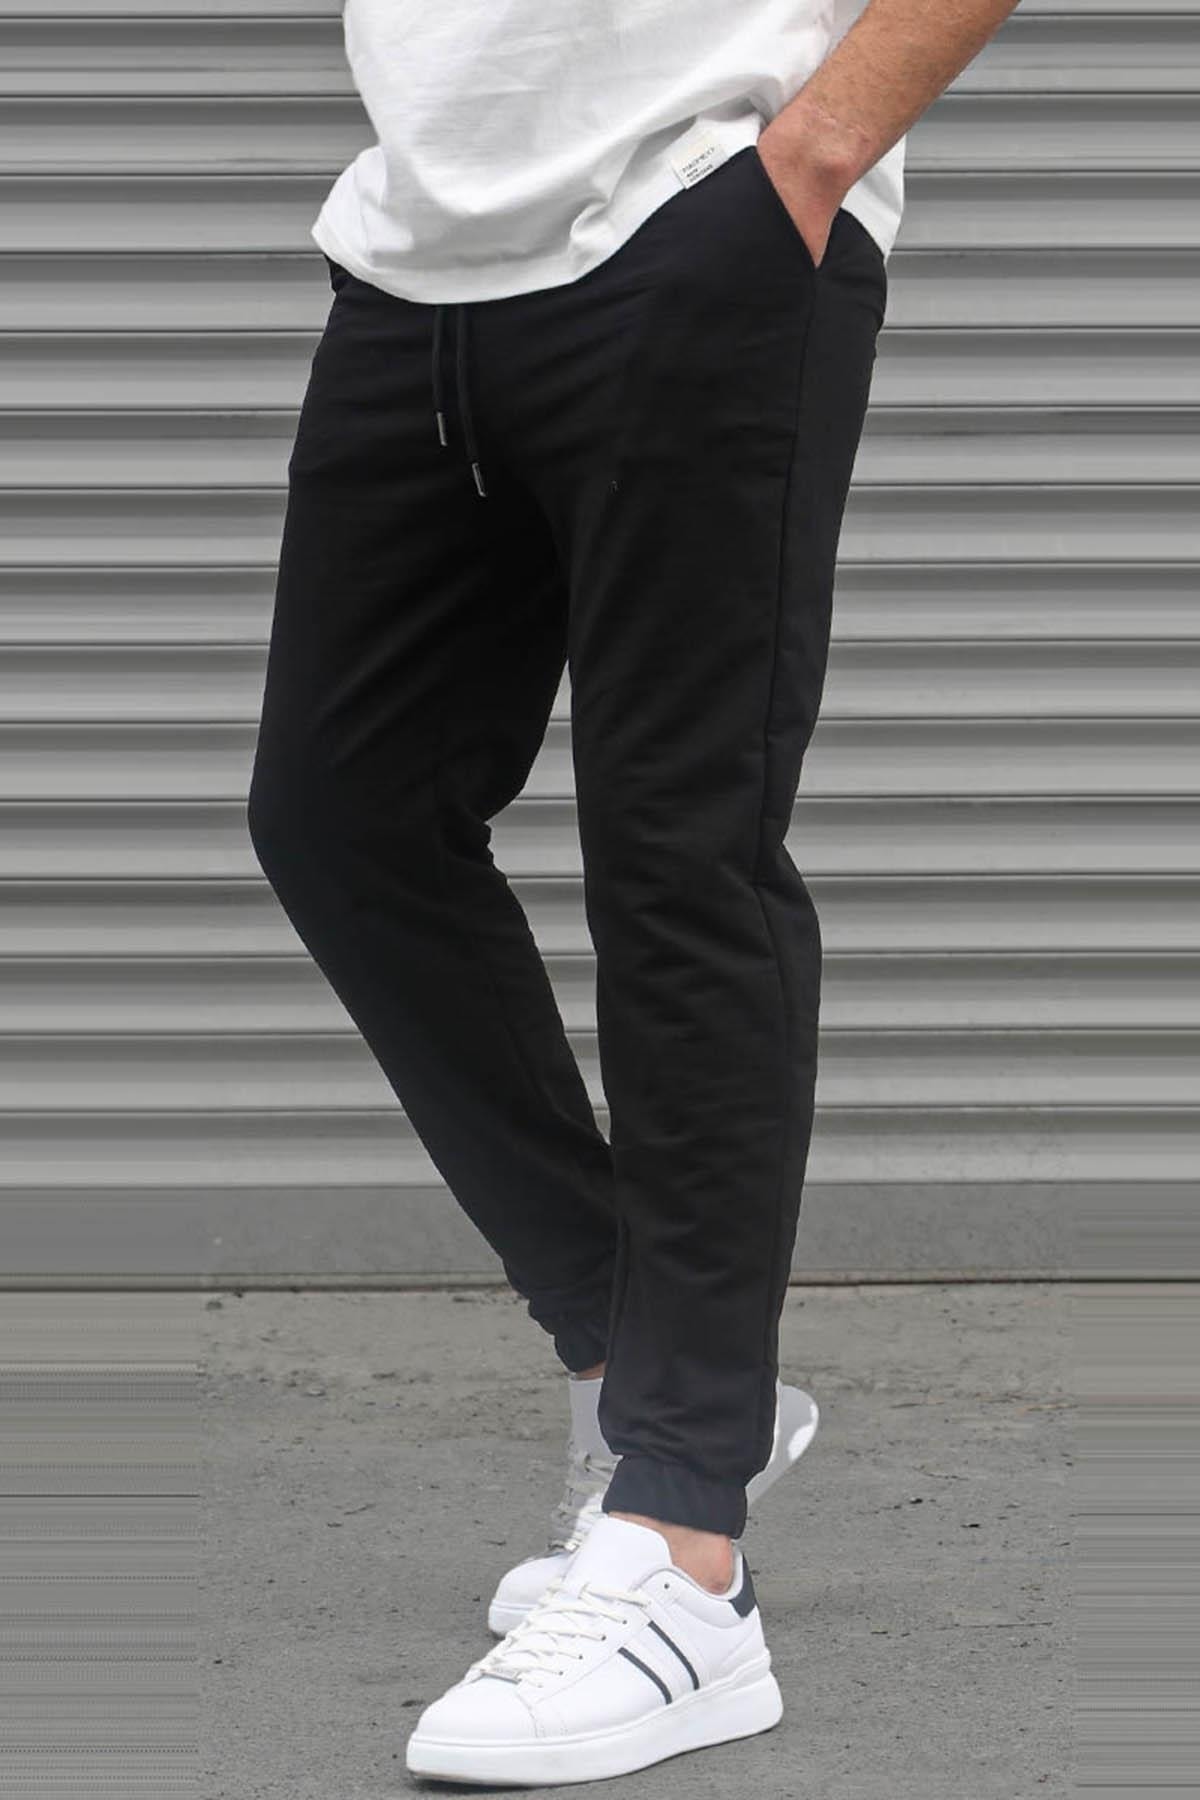 Madmext Black Basic Men's Tracksuits With Elastic Legs 5494